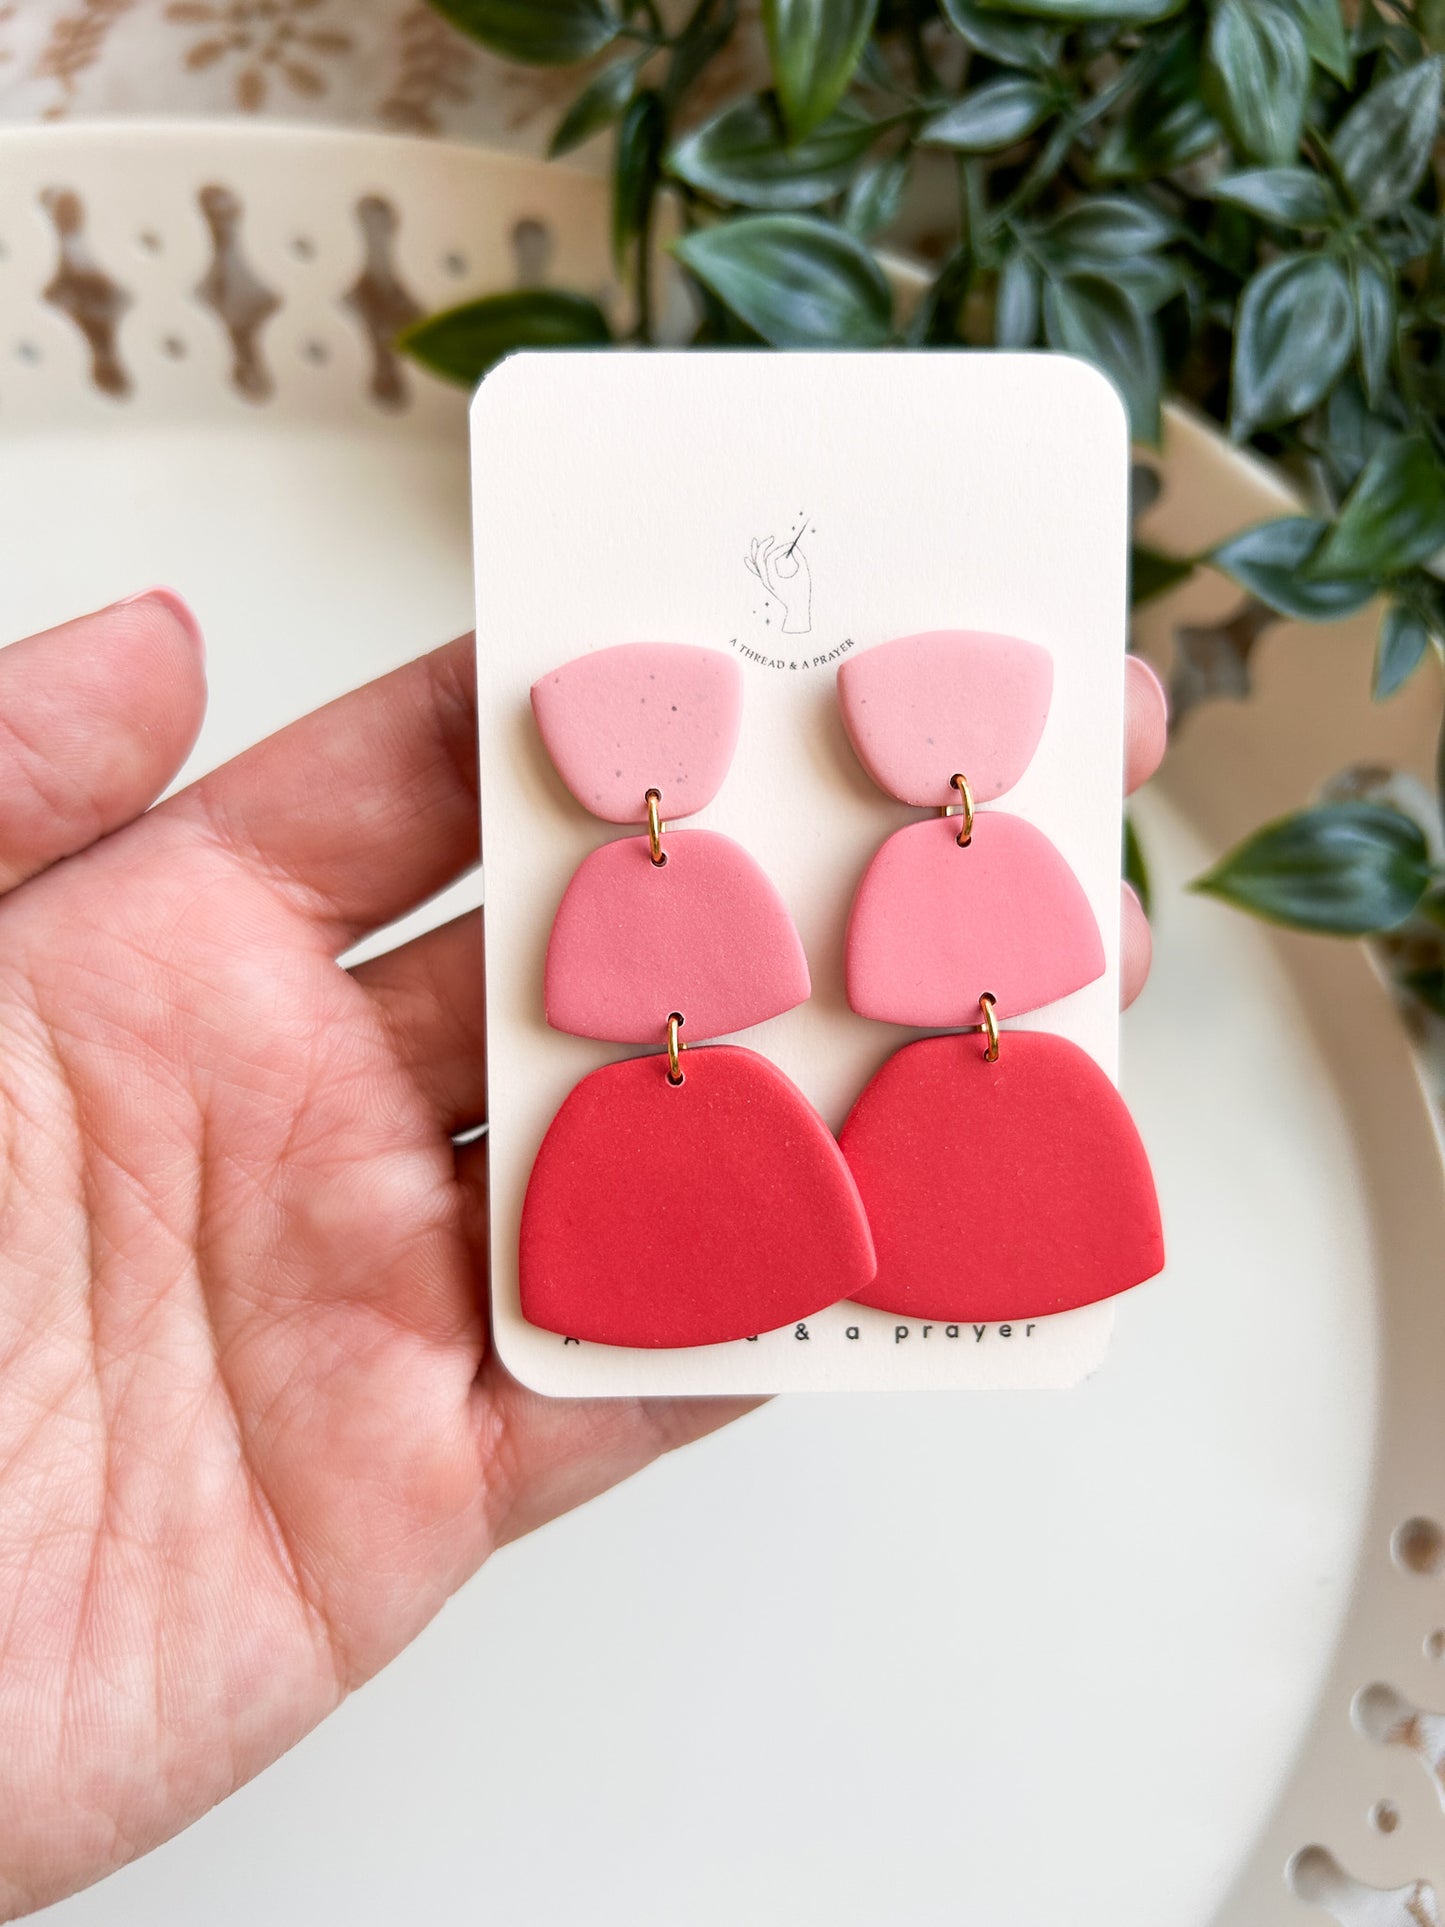 Barbie Girl Clay Pink Earrings | Spring Fashion | Spring Color Earrings | Statement Earrings | Lightweight